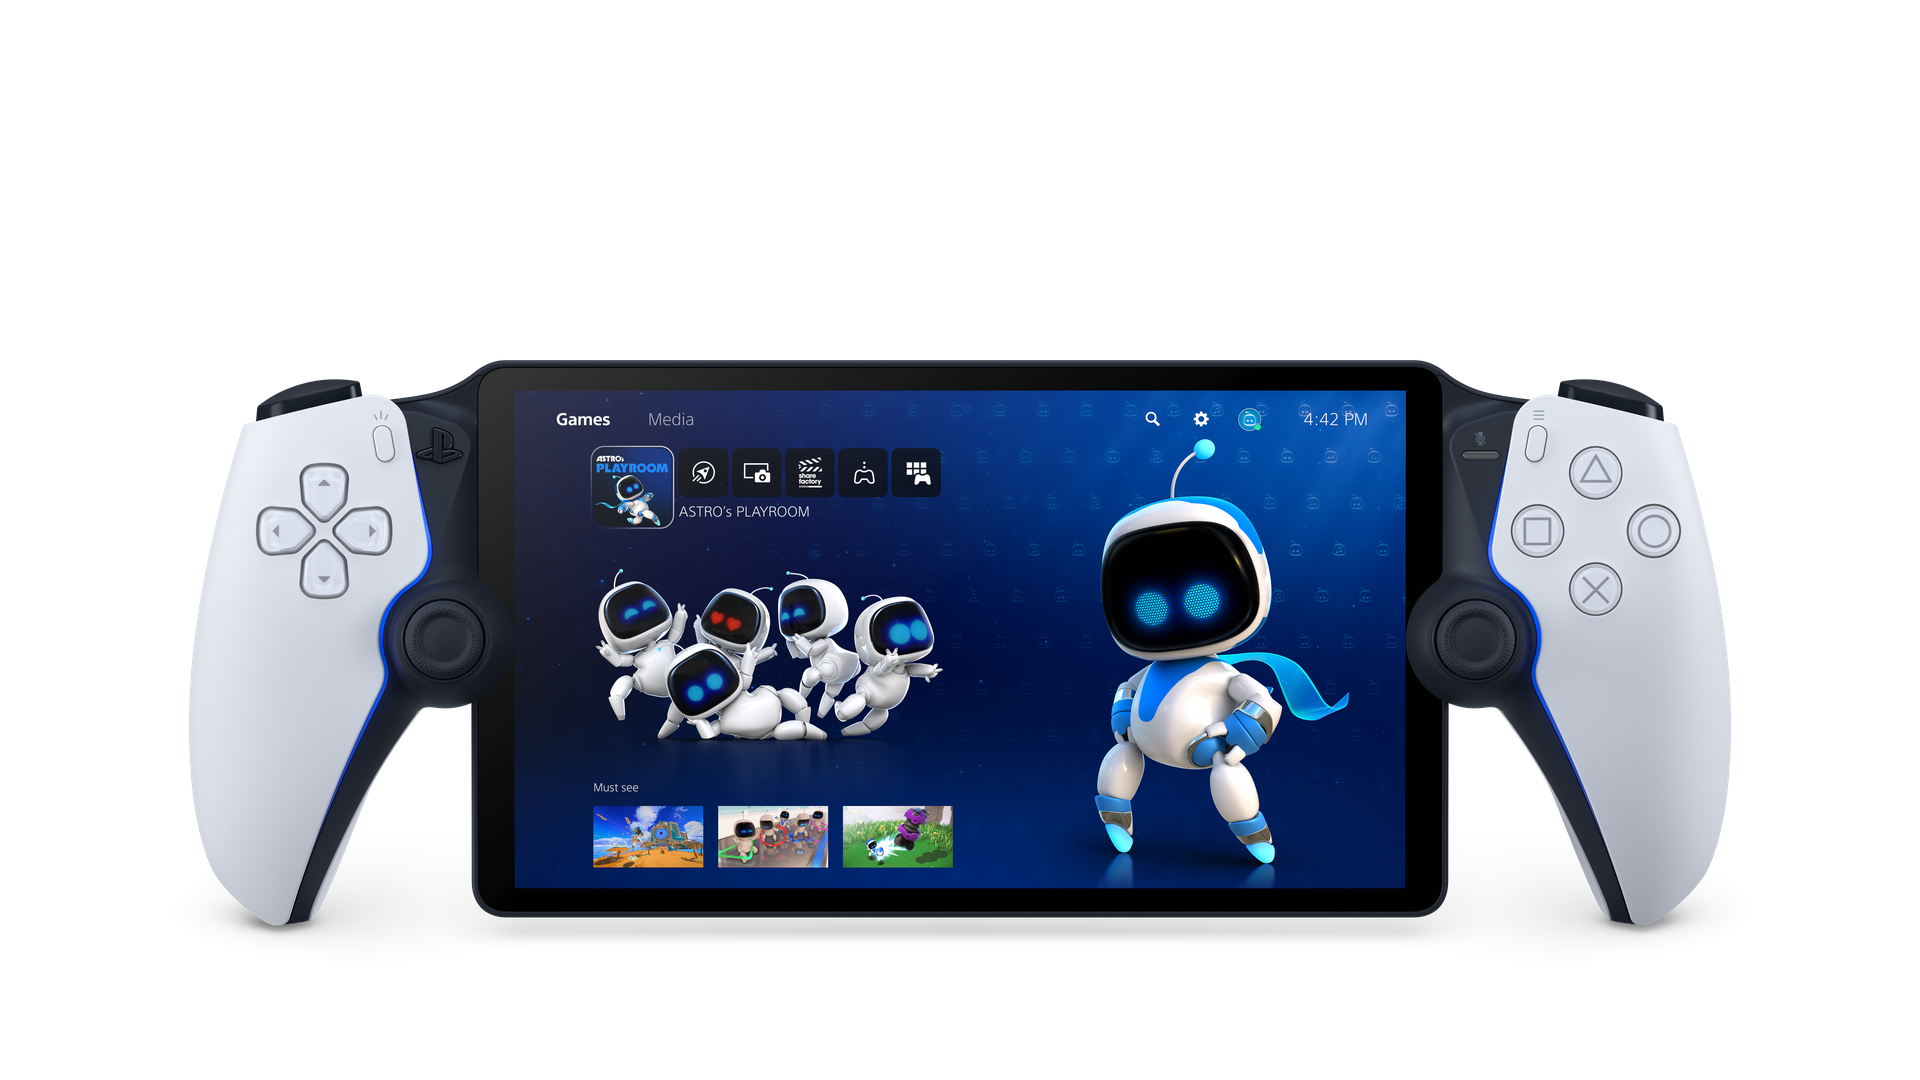 Review: Sony's PlayStation Portal does one narrow thing, but does it well